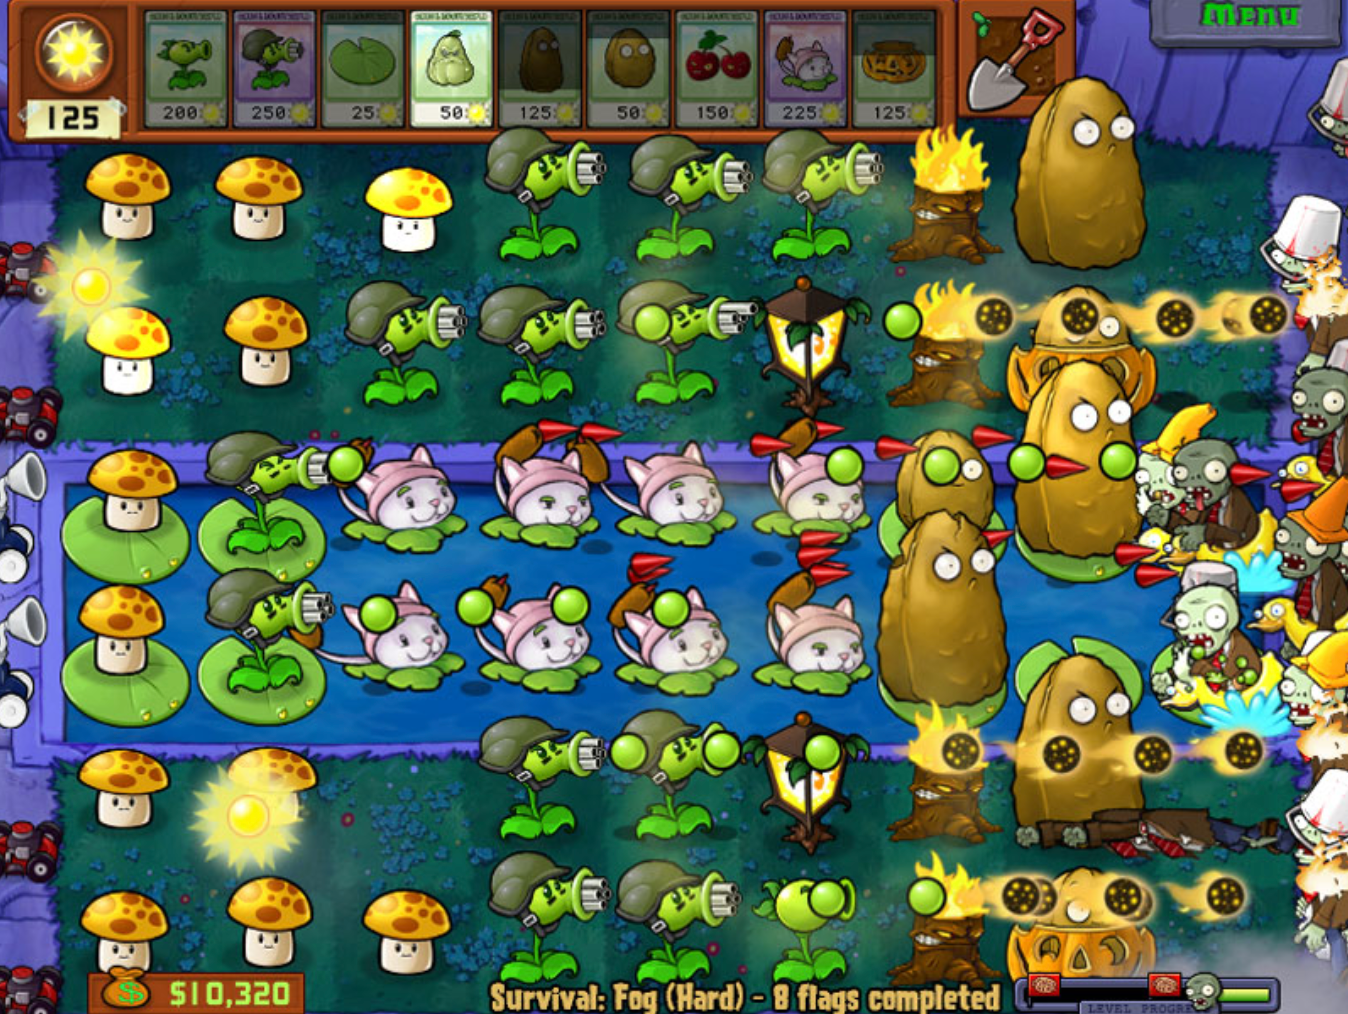 From Bejeweled to Plants Vs Zombies: How PopCap Got Just About Everyone